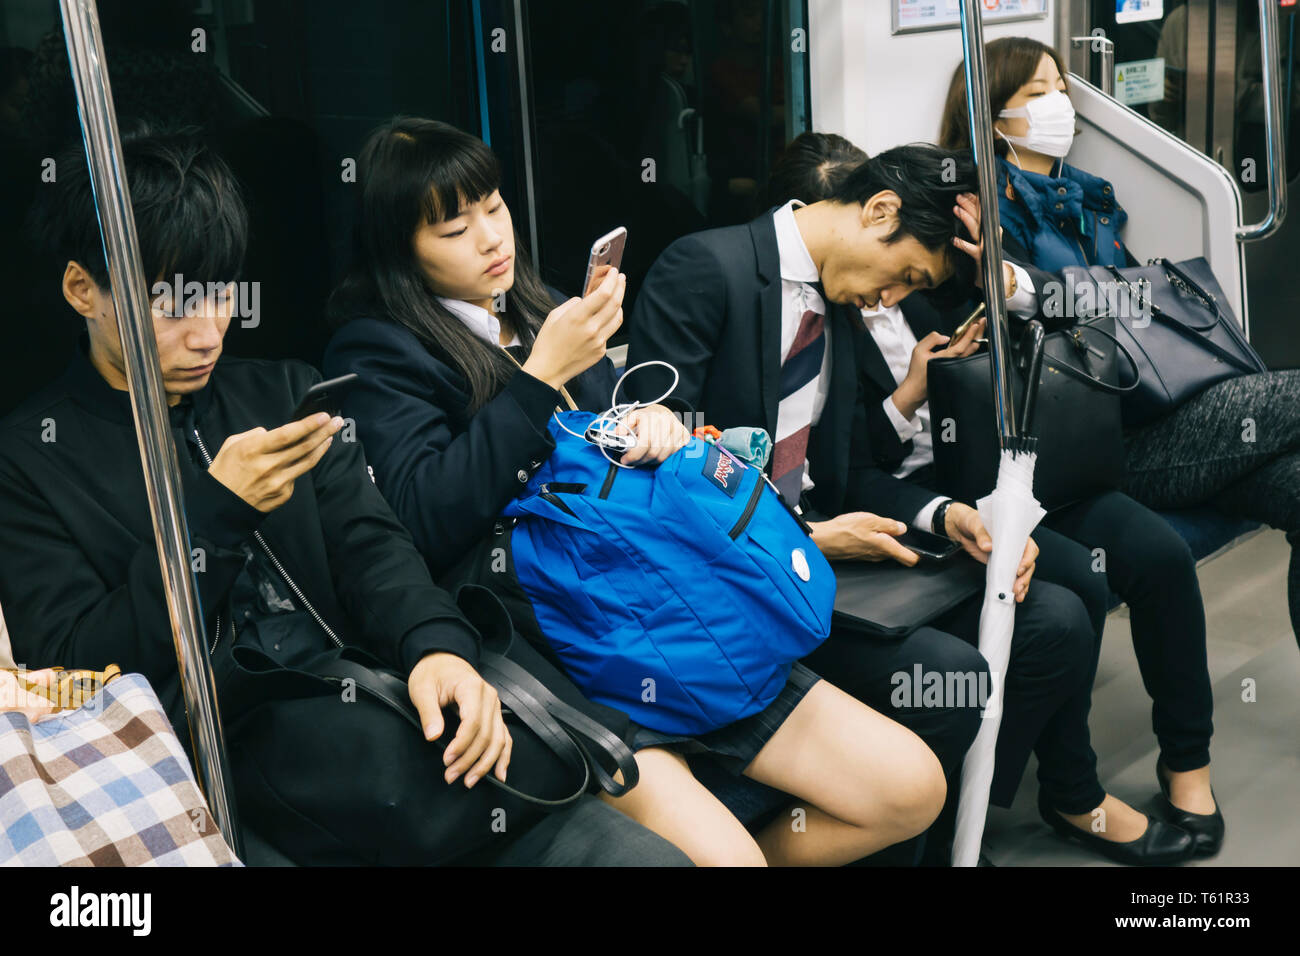 Japanese people sleeping and looking the mobile phone in the Tokyo subway wagon Stock Photo